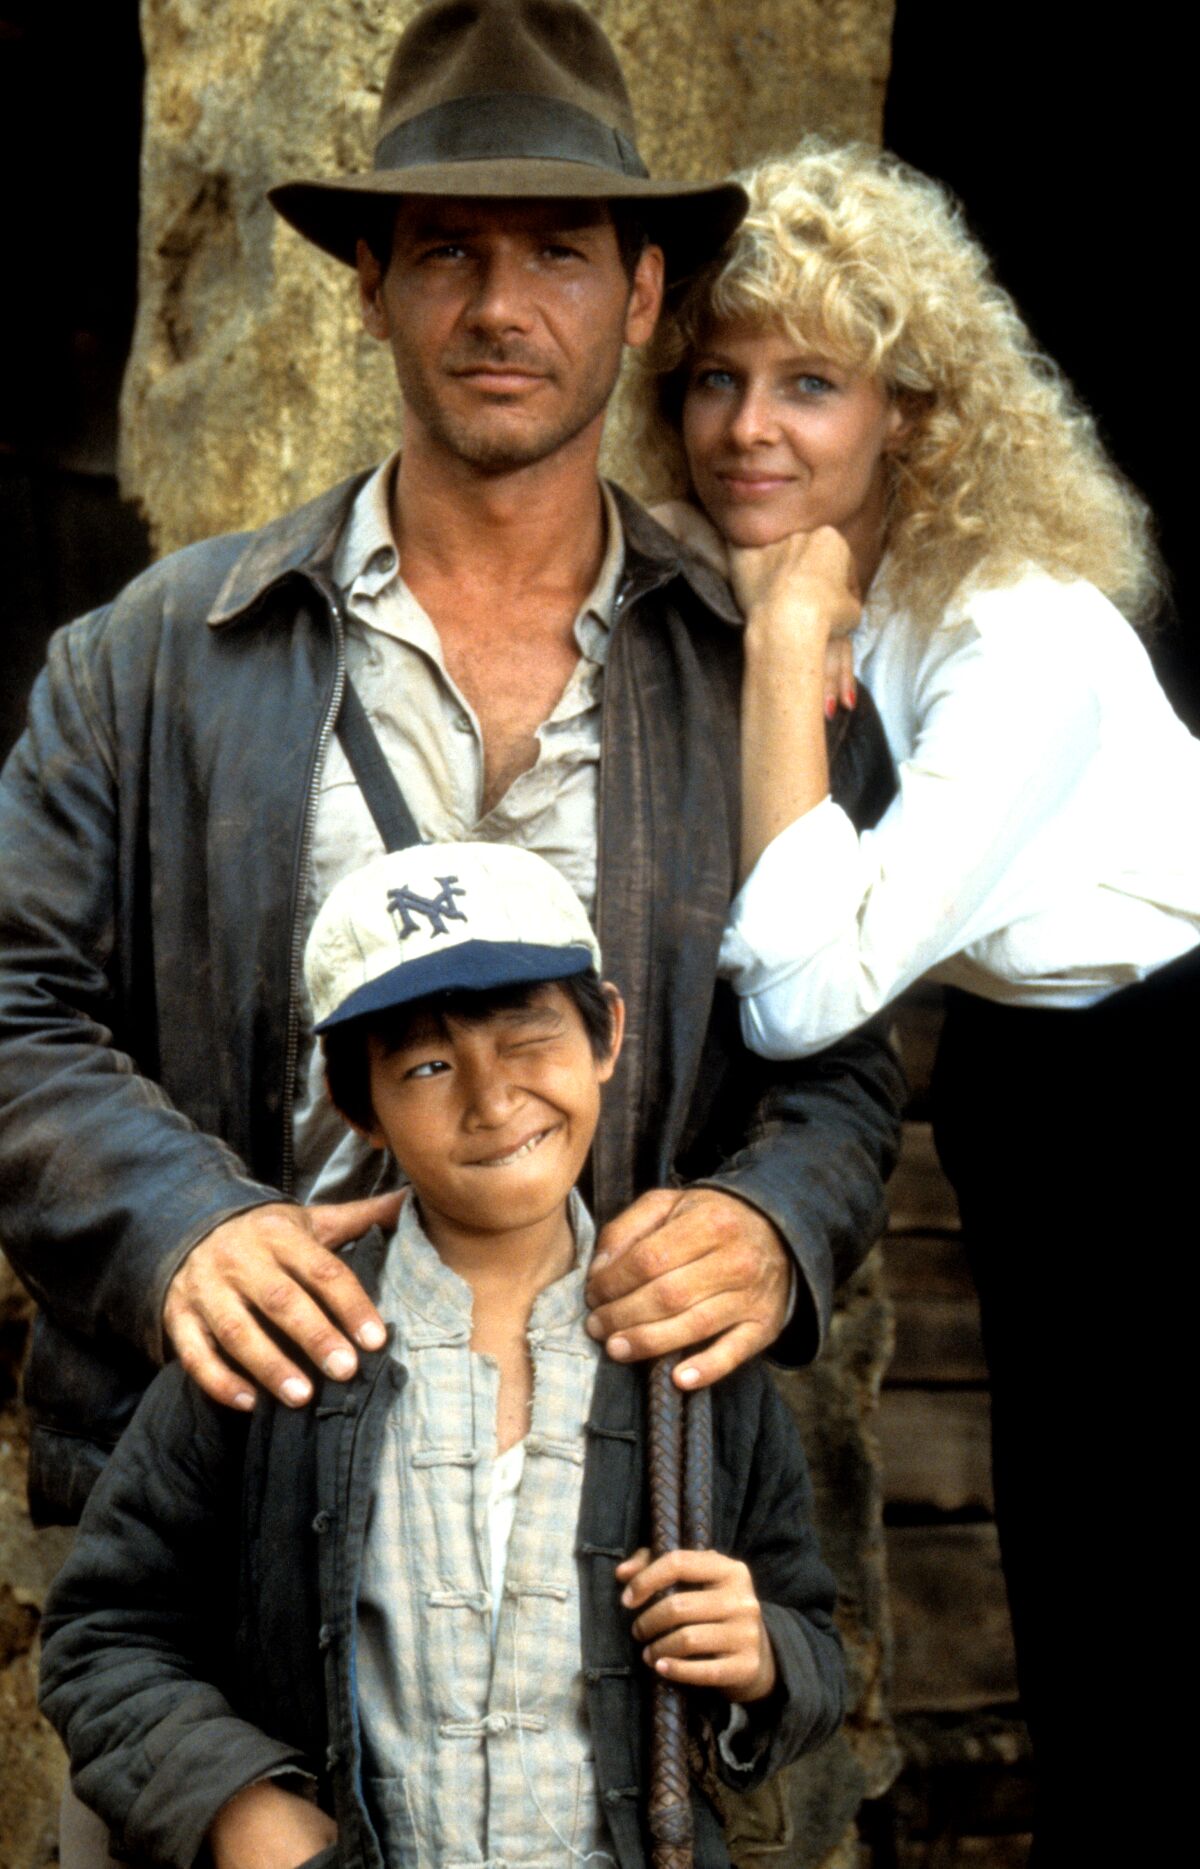 A man in a brown hat and a woman with curly blond hair posing with a child in a baseball cap